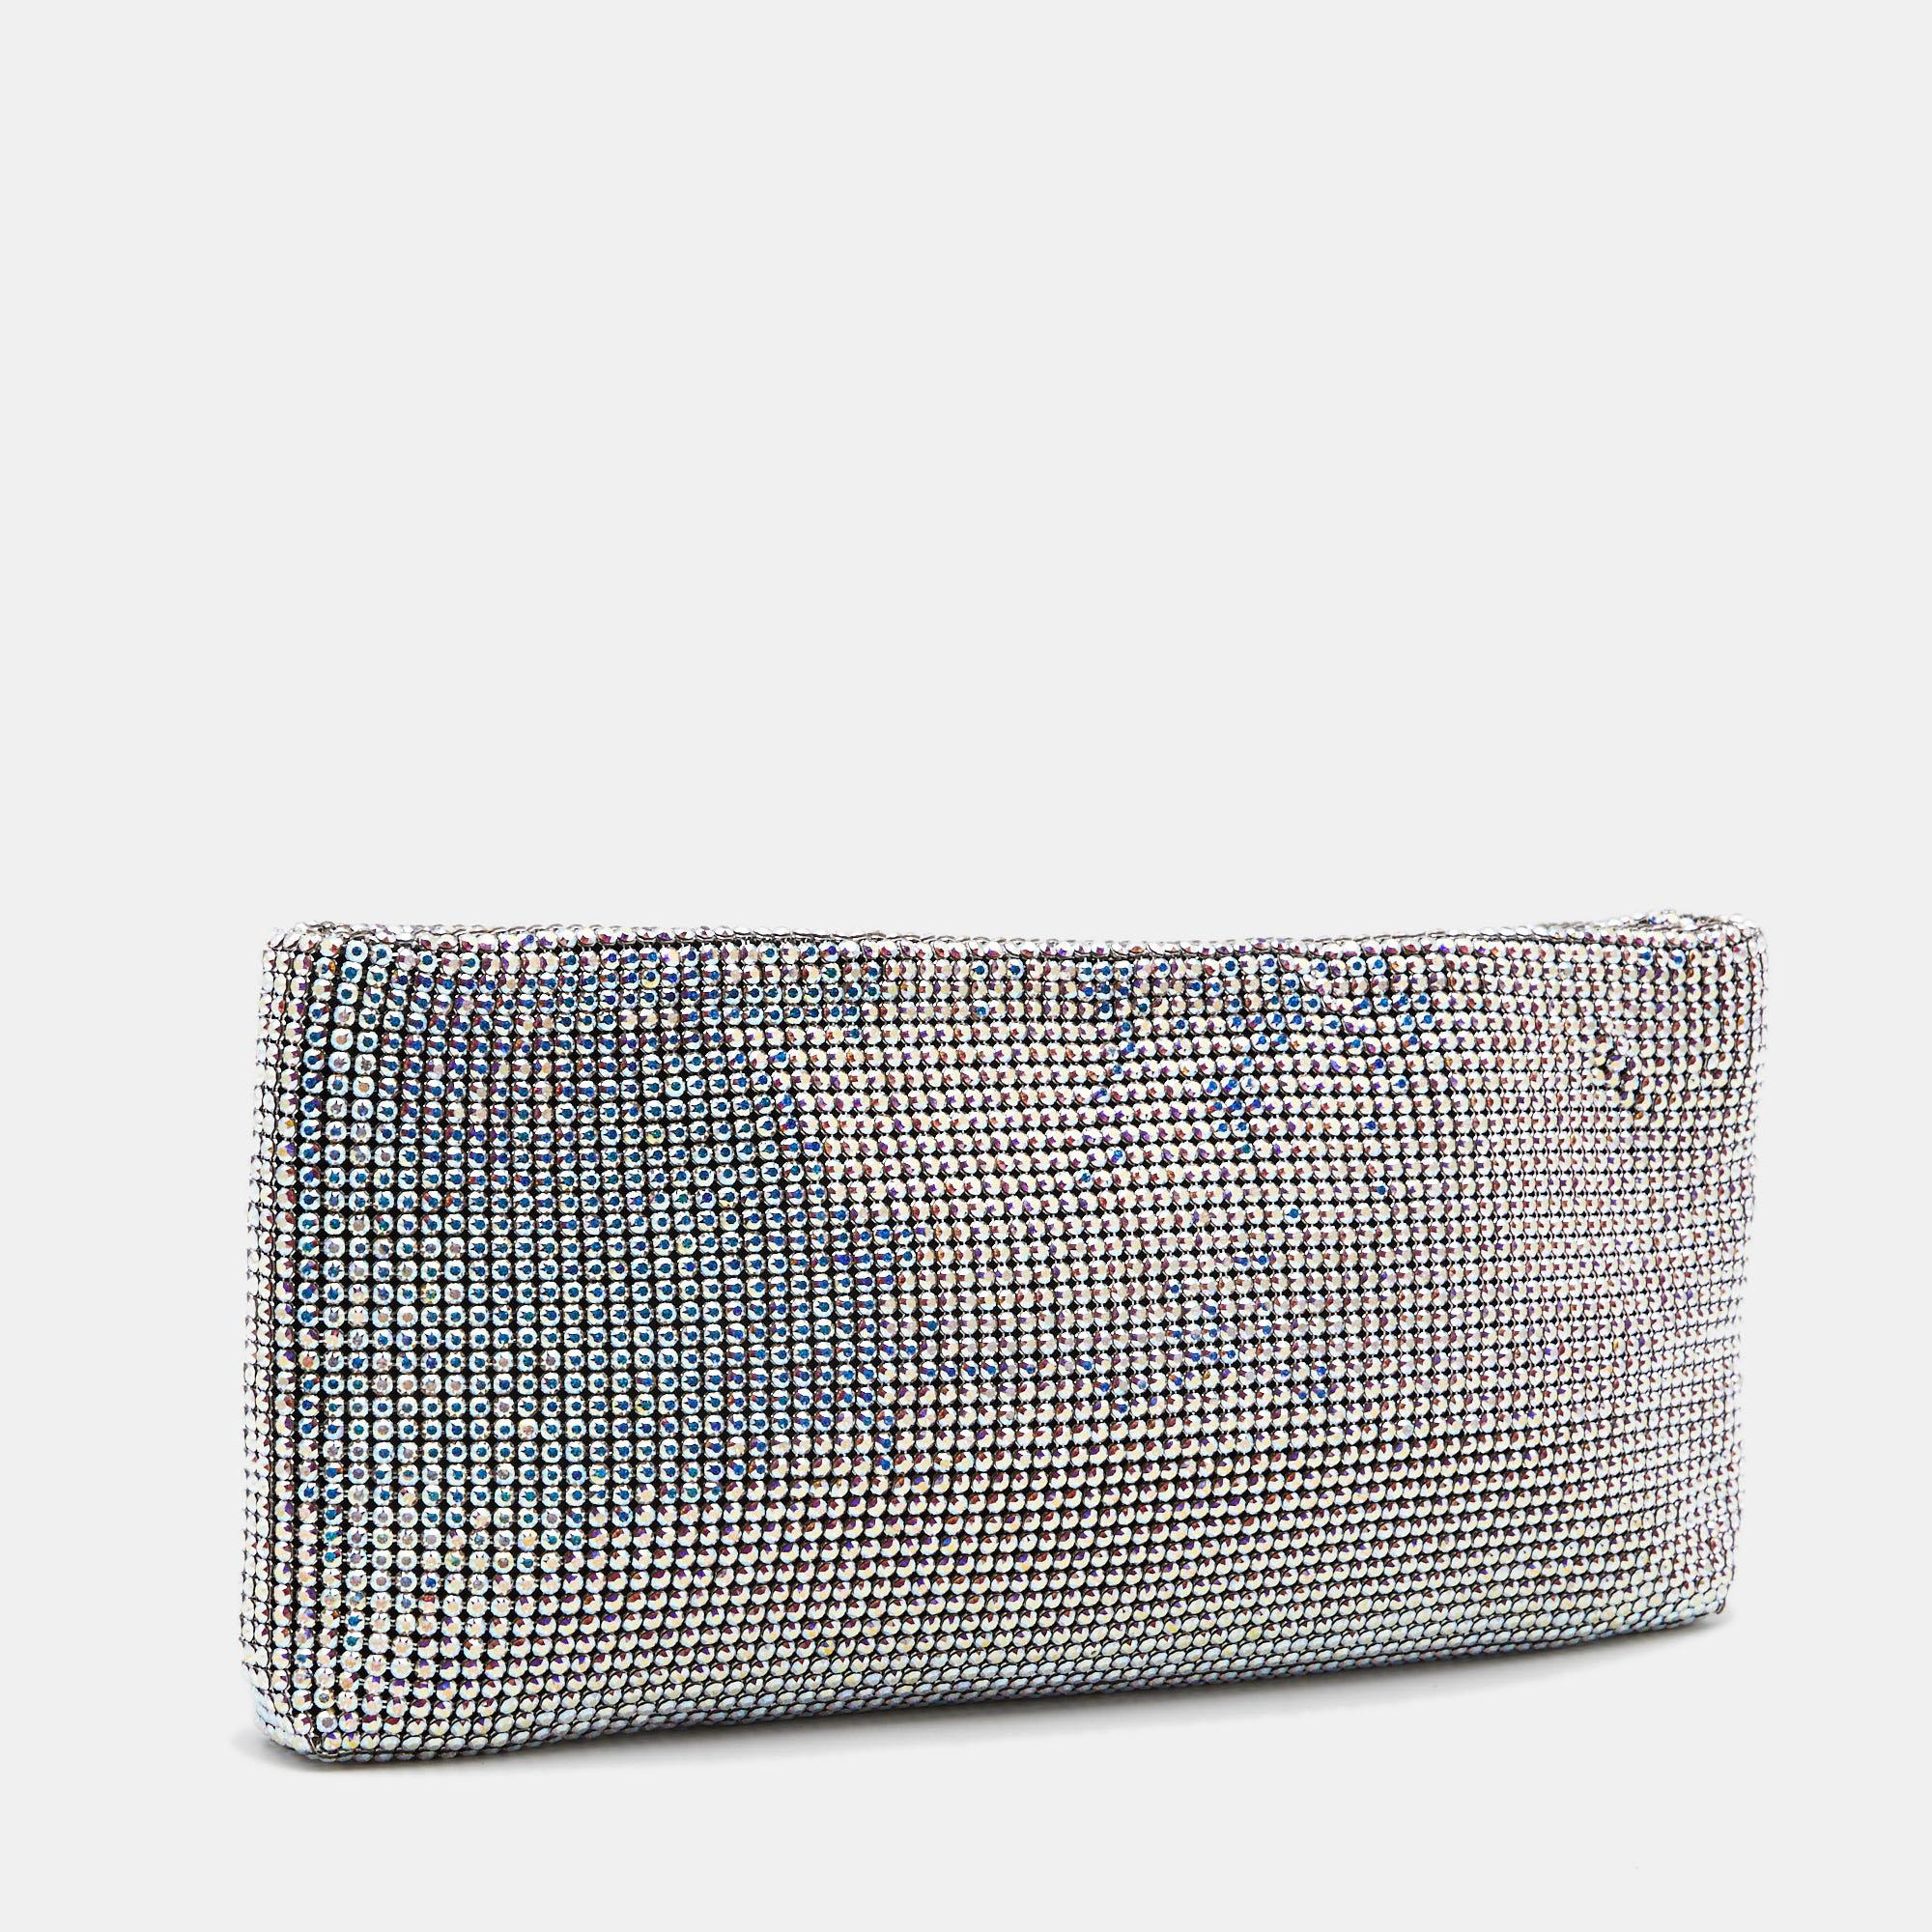 Gray Christian Louboutin Multicolor Crystal Maykimay Strass Clutch